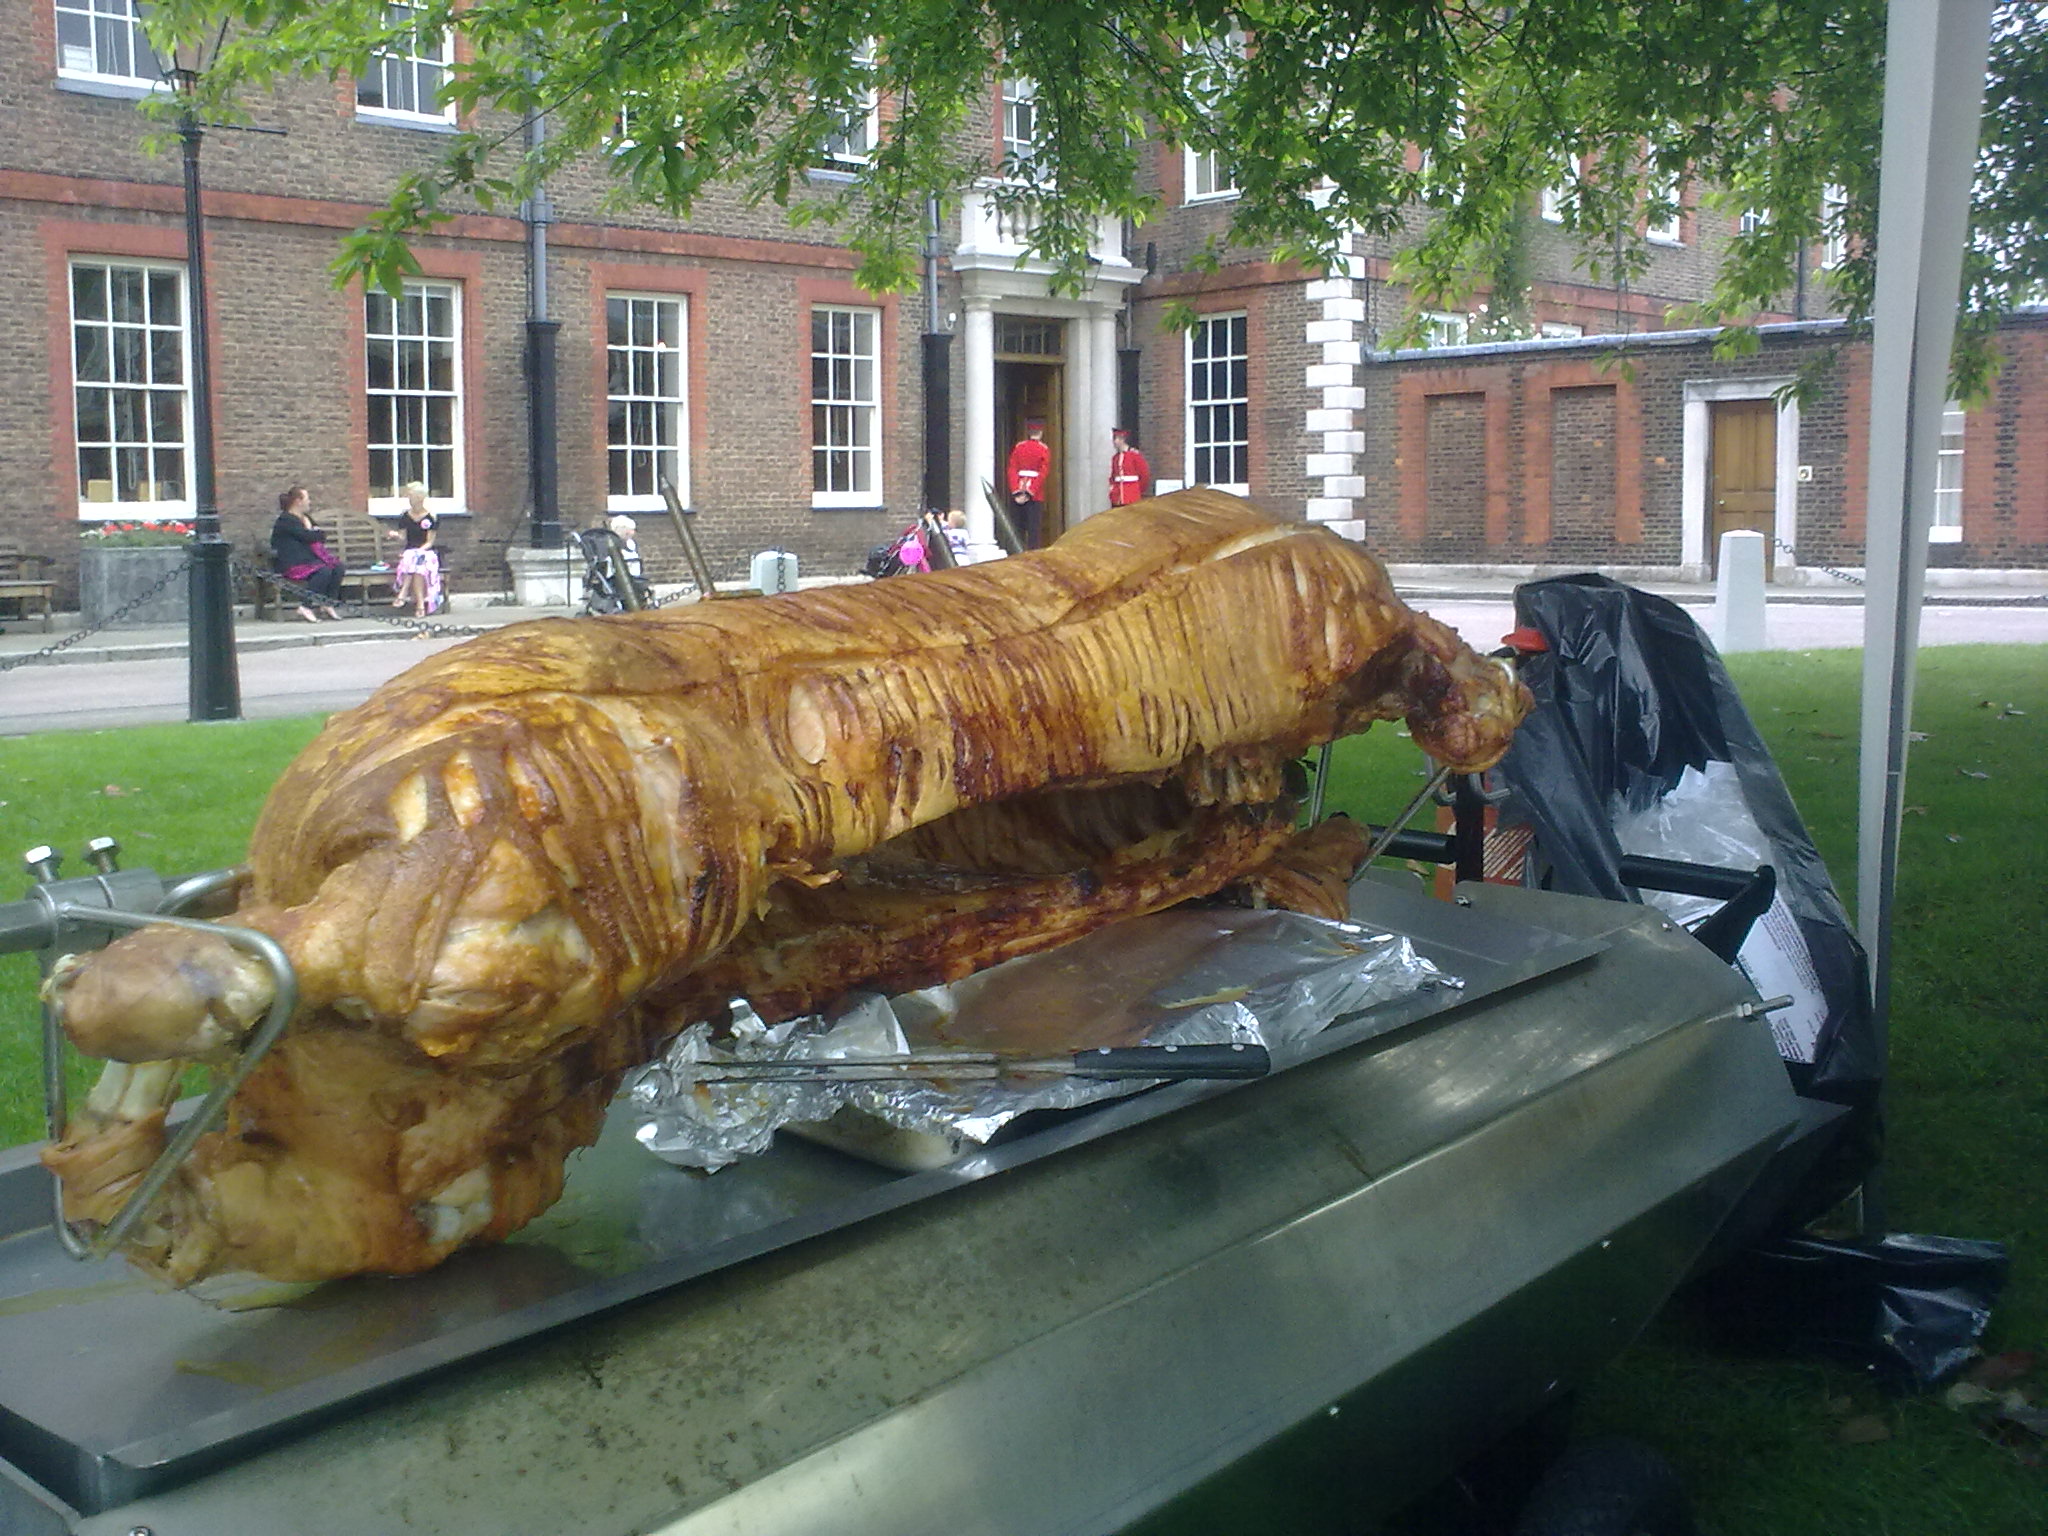 Hog Roast Party Catering for Colleg Ball in Oxford